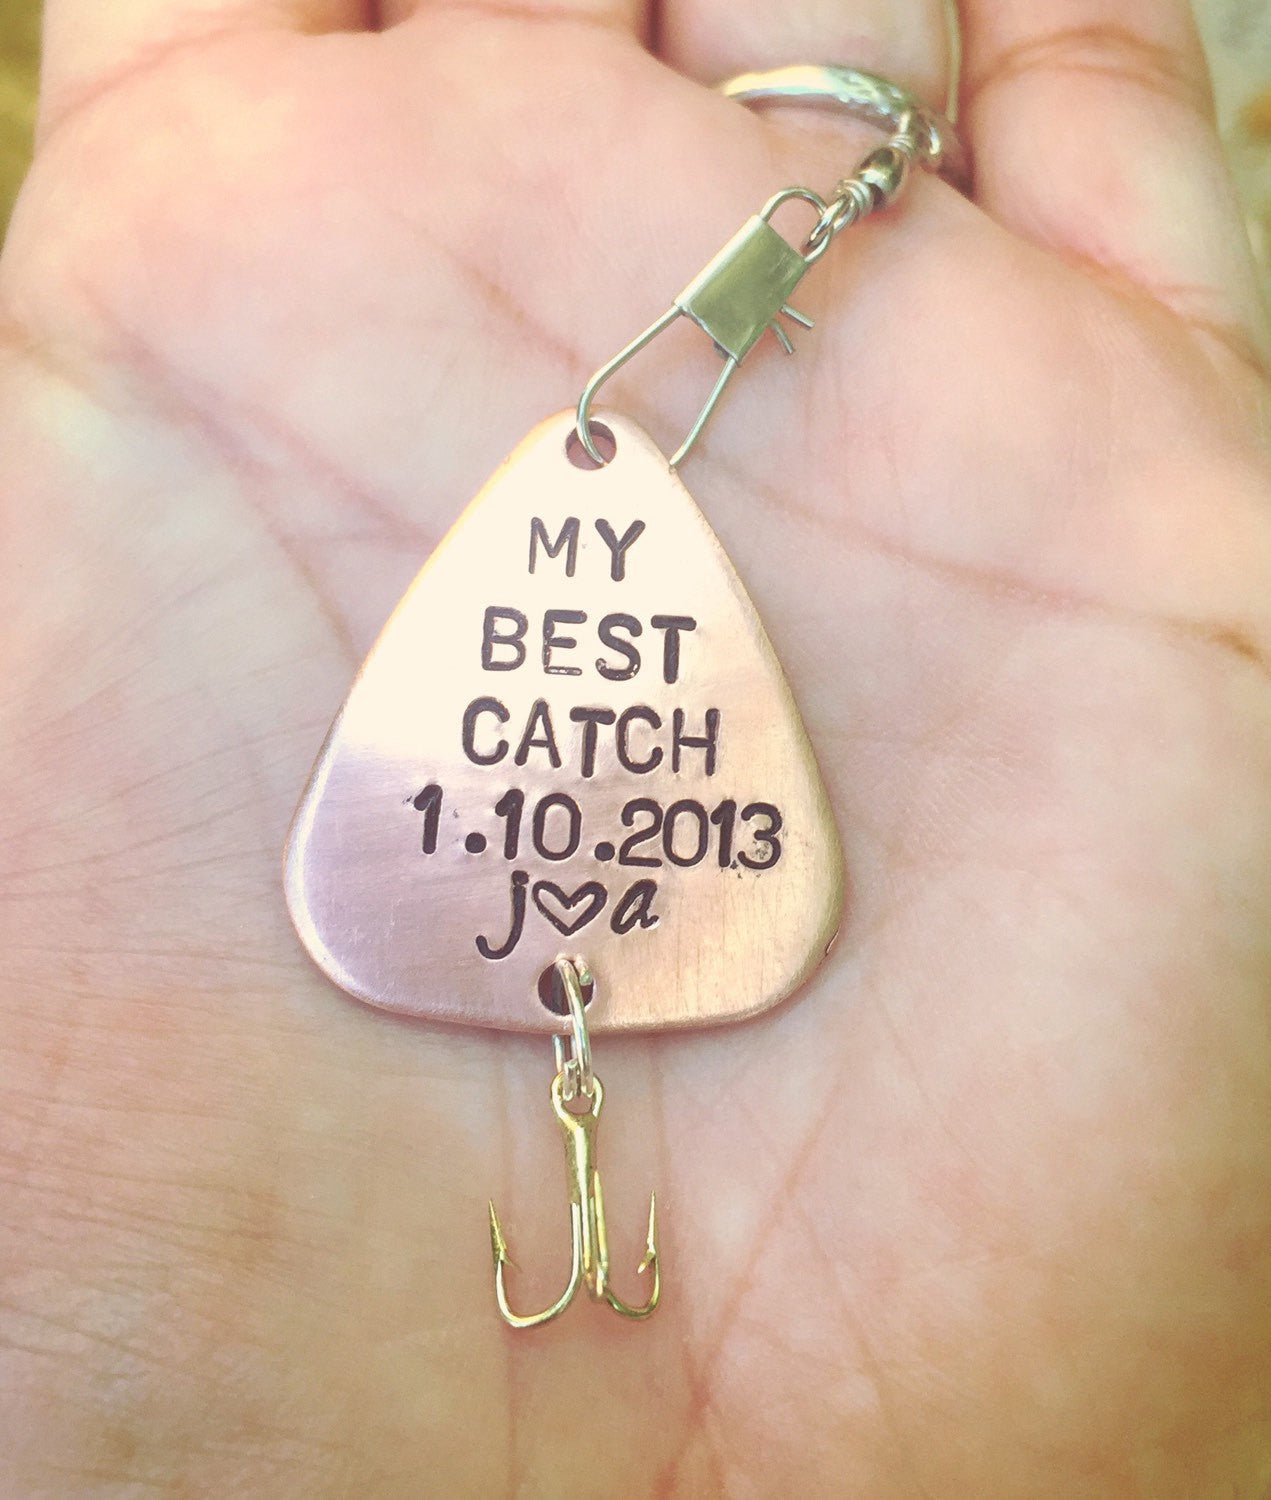 Father's Day Gift, Fishing Lure, Boyfriend Gift, Hooked On You, My Best Catch, Personalized Fishing Lure,natashaaloha - Natashaaloha, jewelry, bracelets, necklace, keychains, fishing lures, gifts for men, charms, personalized, 